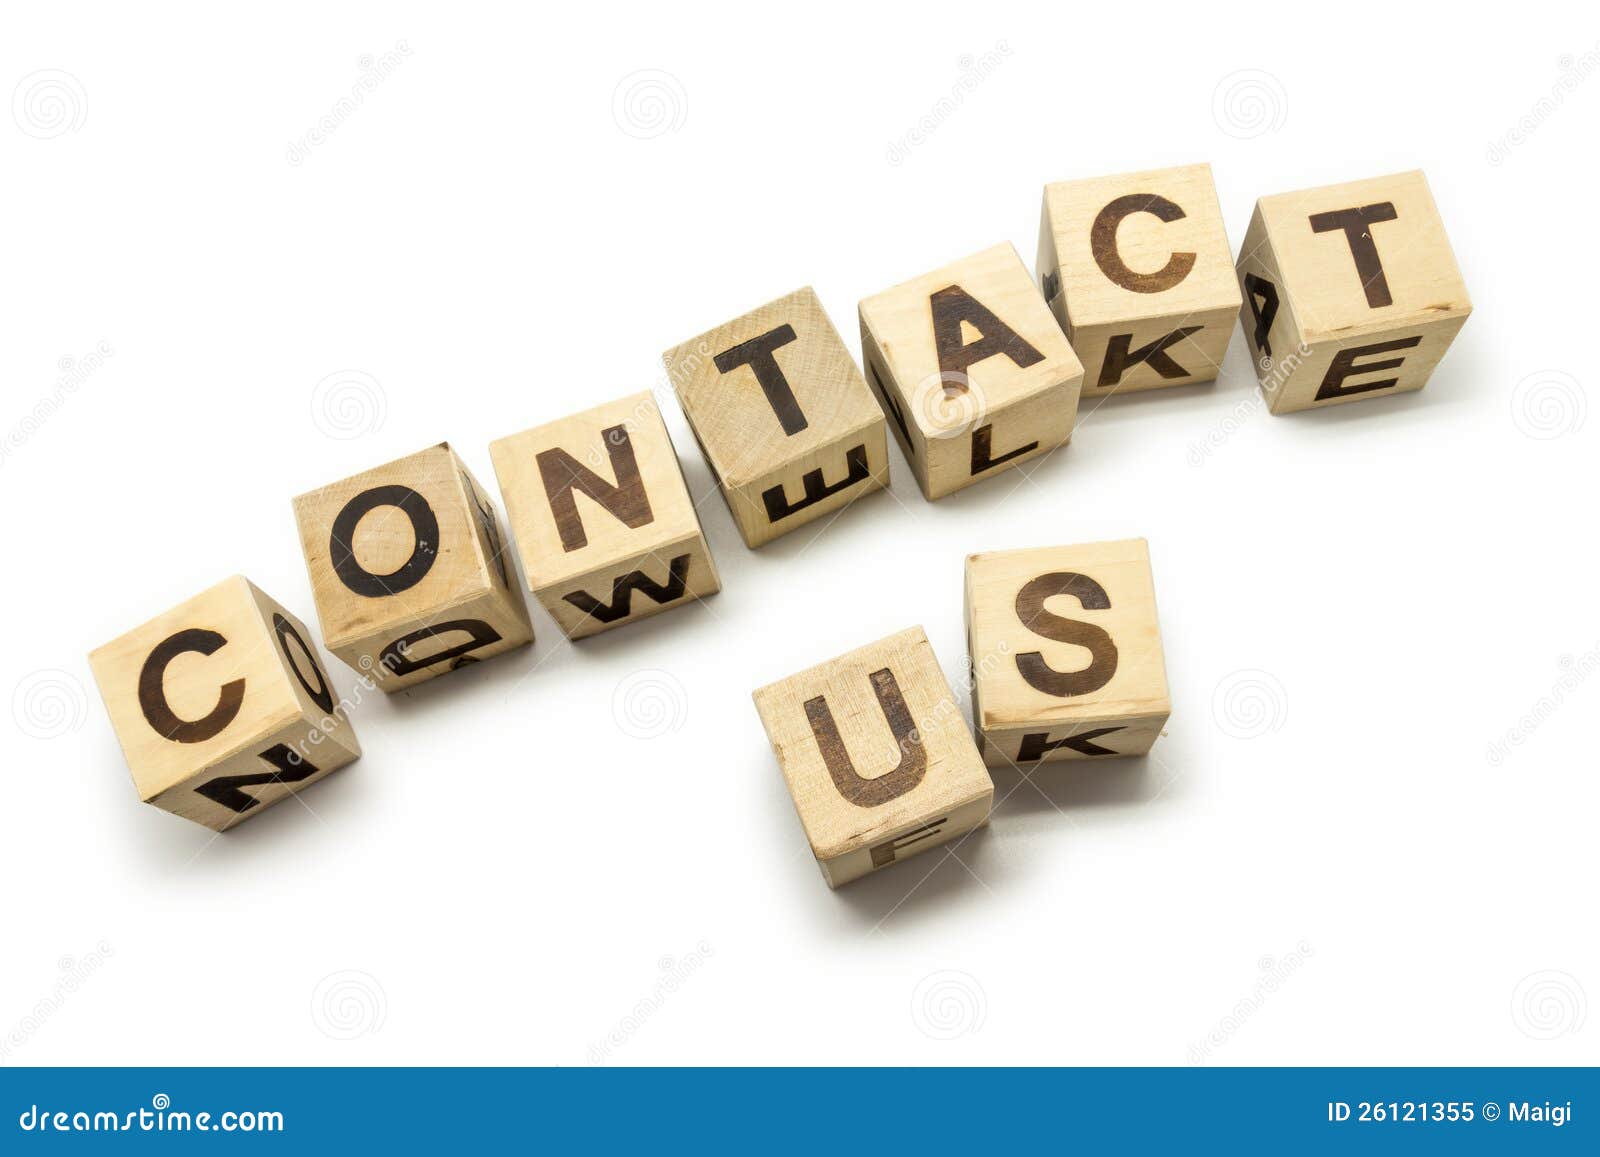 business contact us stock photo free download